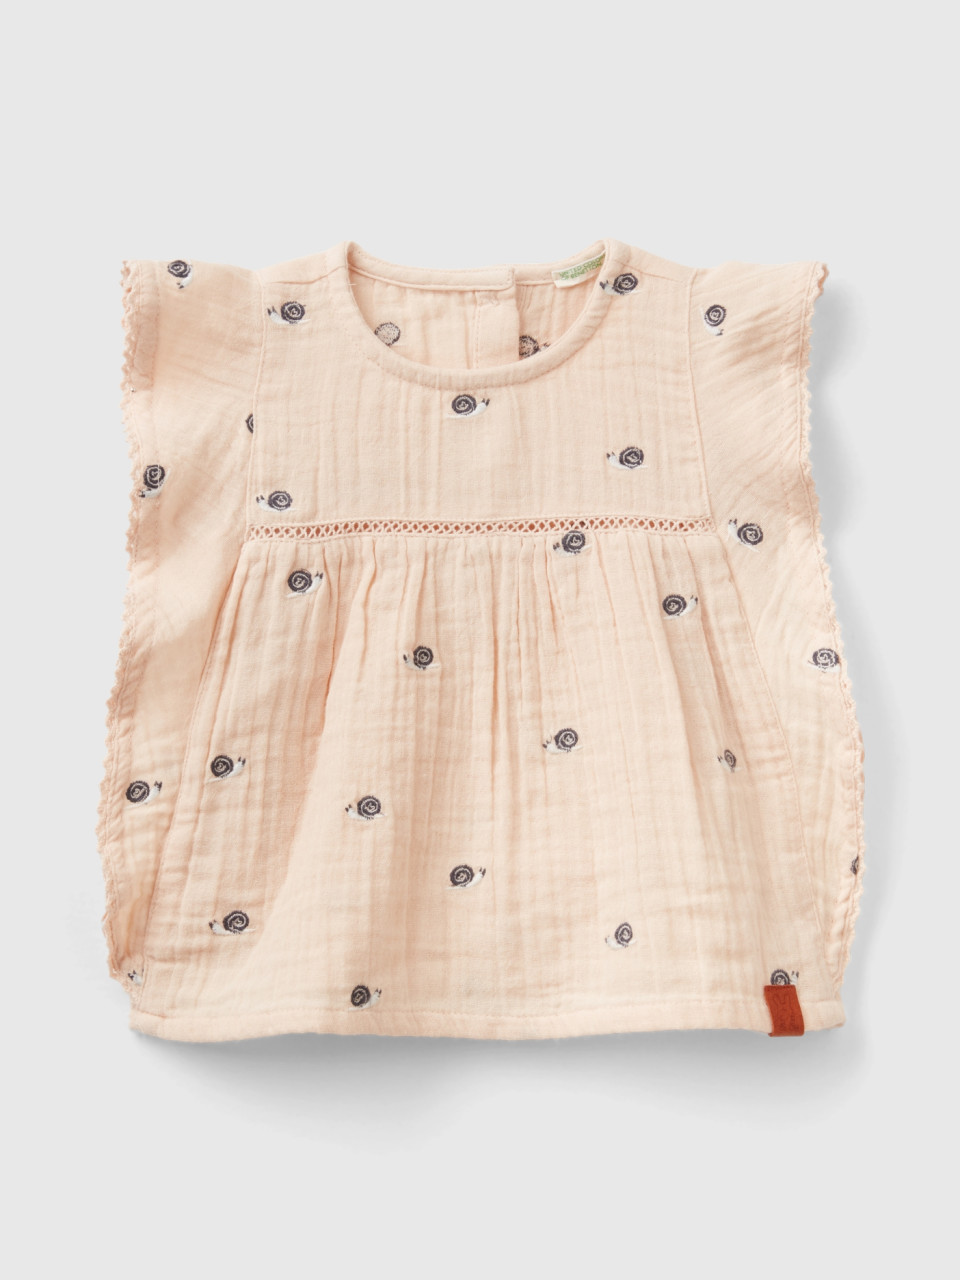 Benetton, Blouse With Ruffles And Embroidery, Peach, Kids